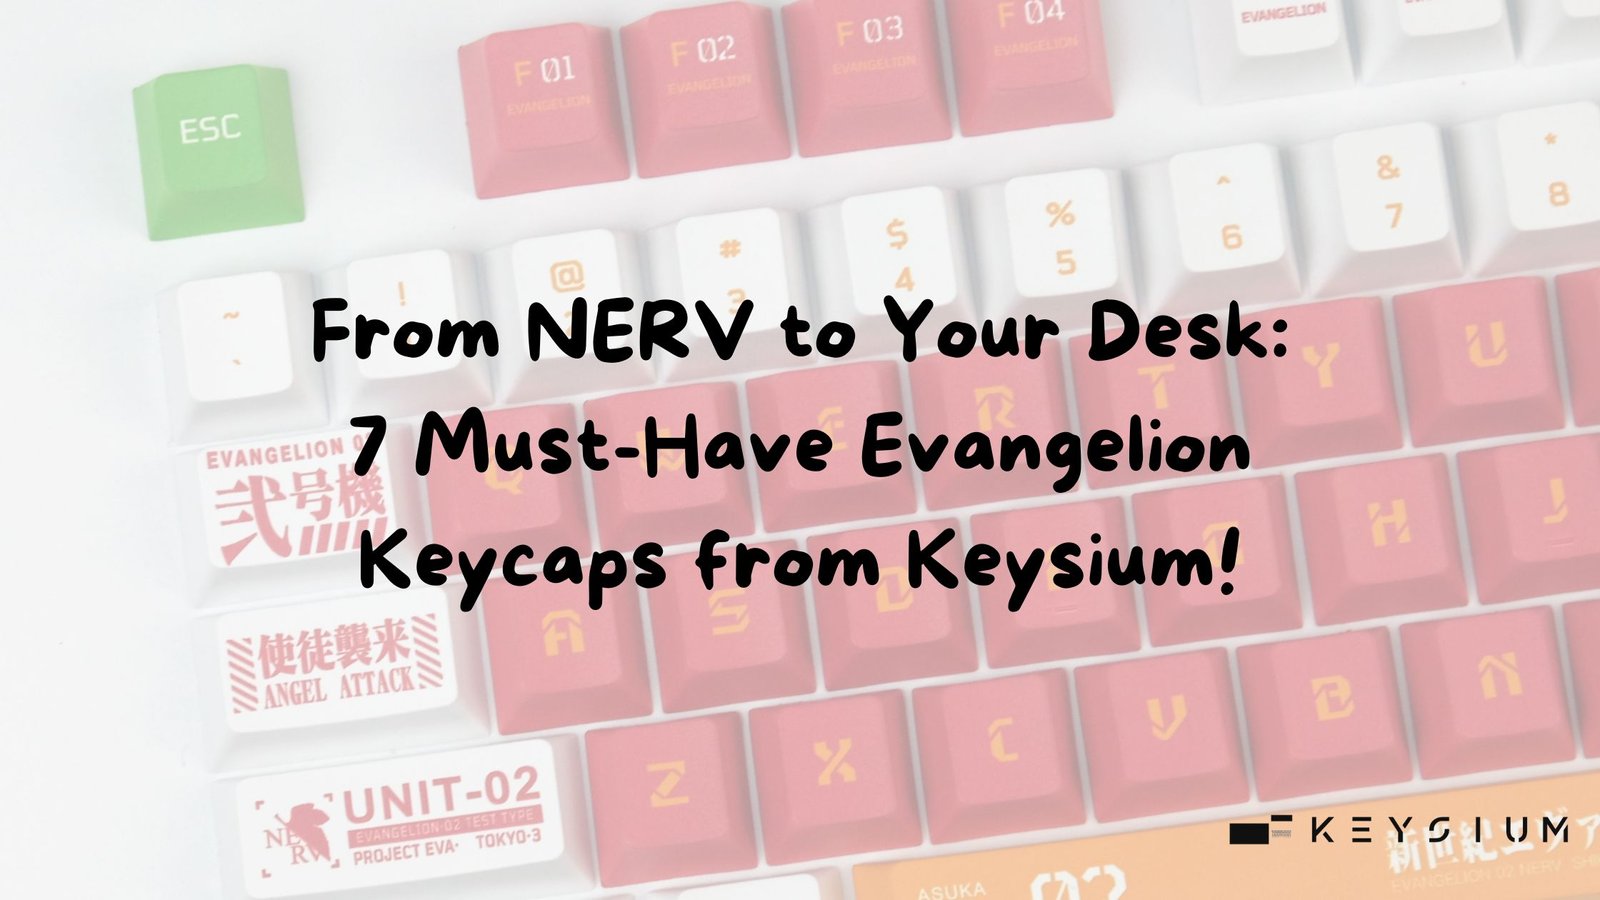 From NERV to Your Desk: 7 Must-Have Evangelion Keycaps from Keysium!